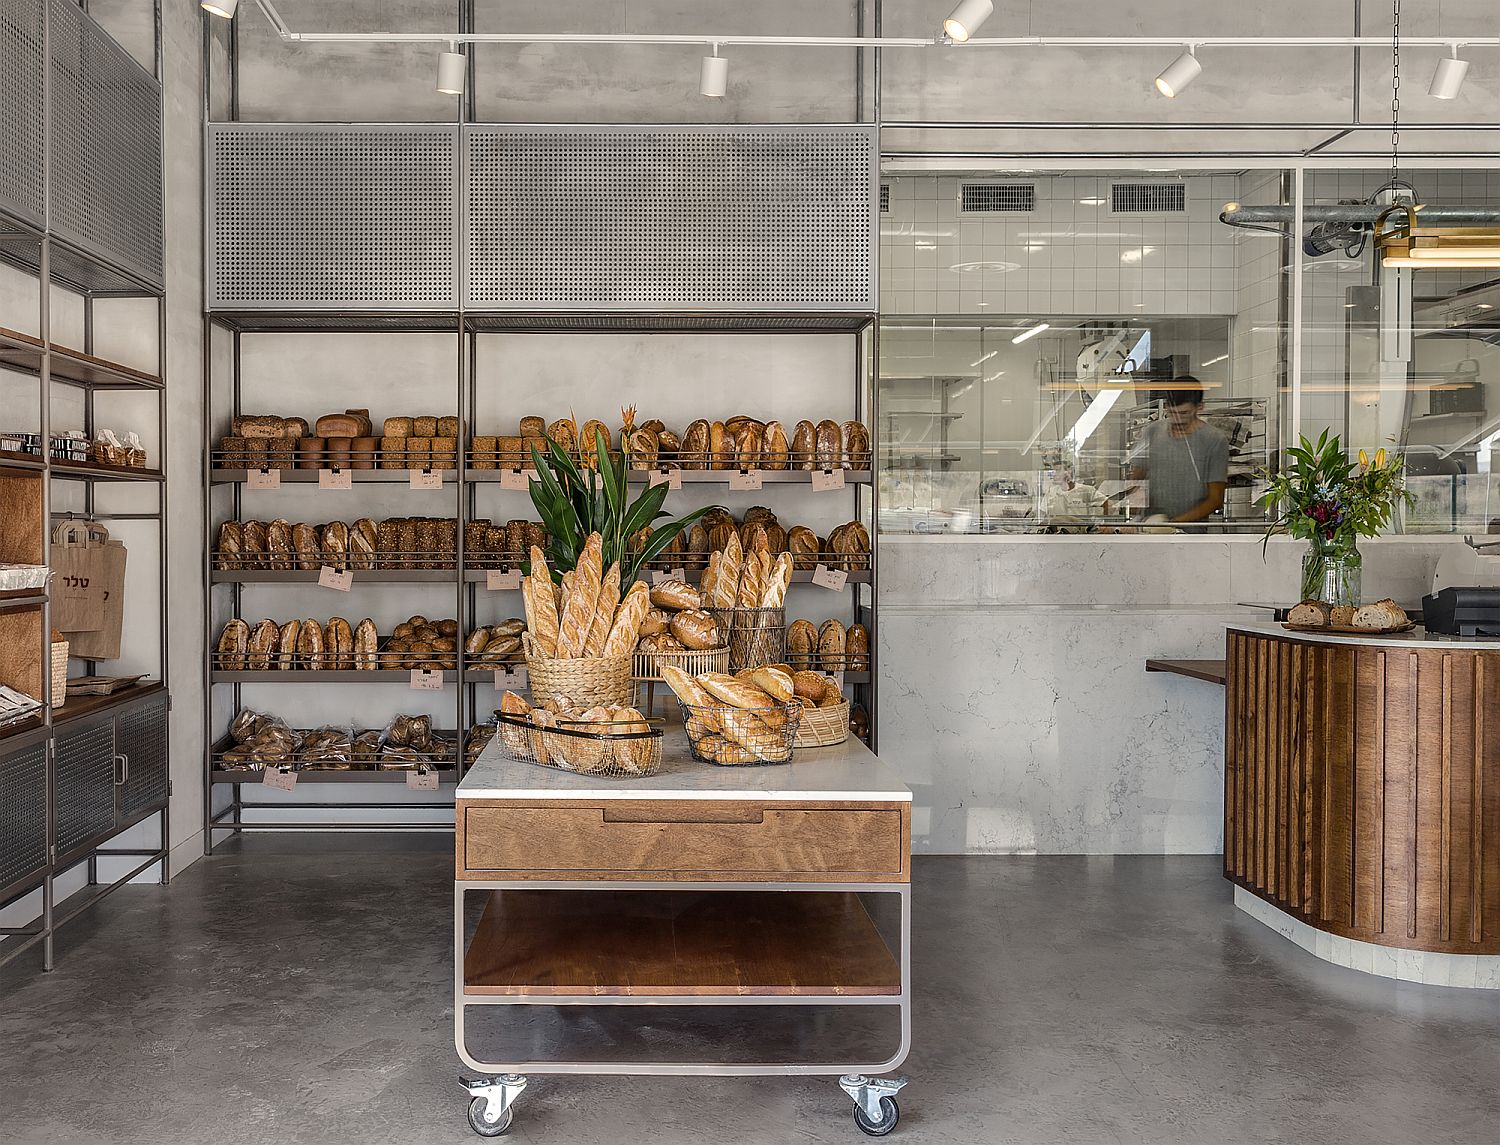 Revamped-modern-interior-of-Teller-bakery-and-pastry-factory-in-Israel